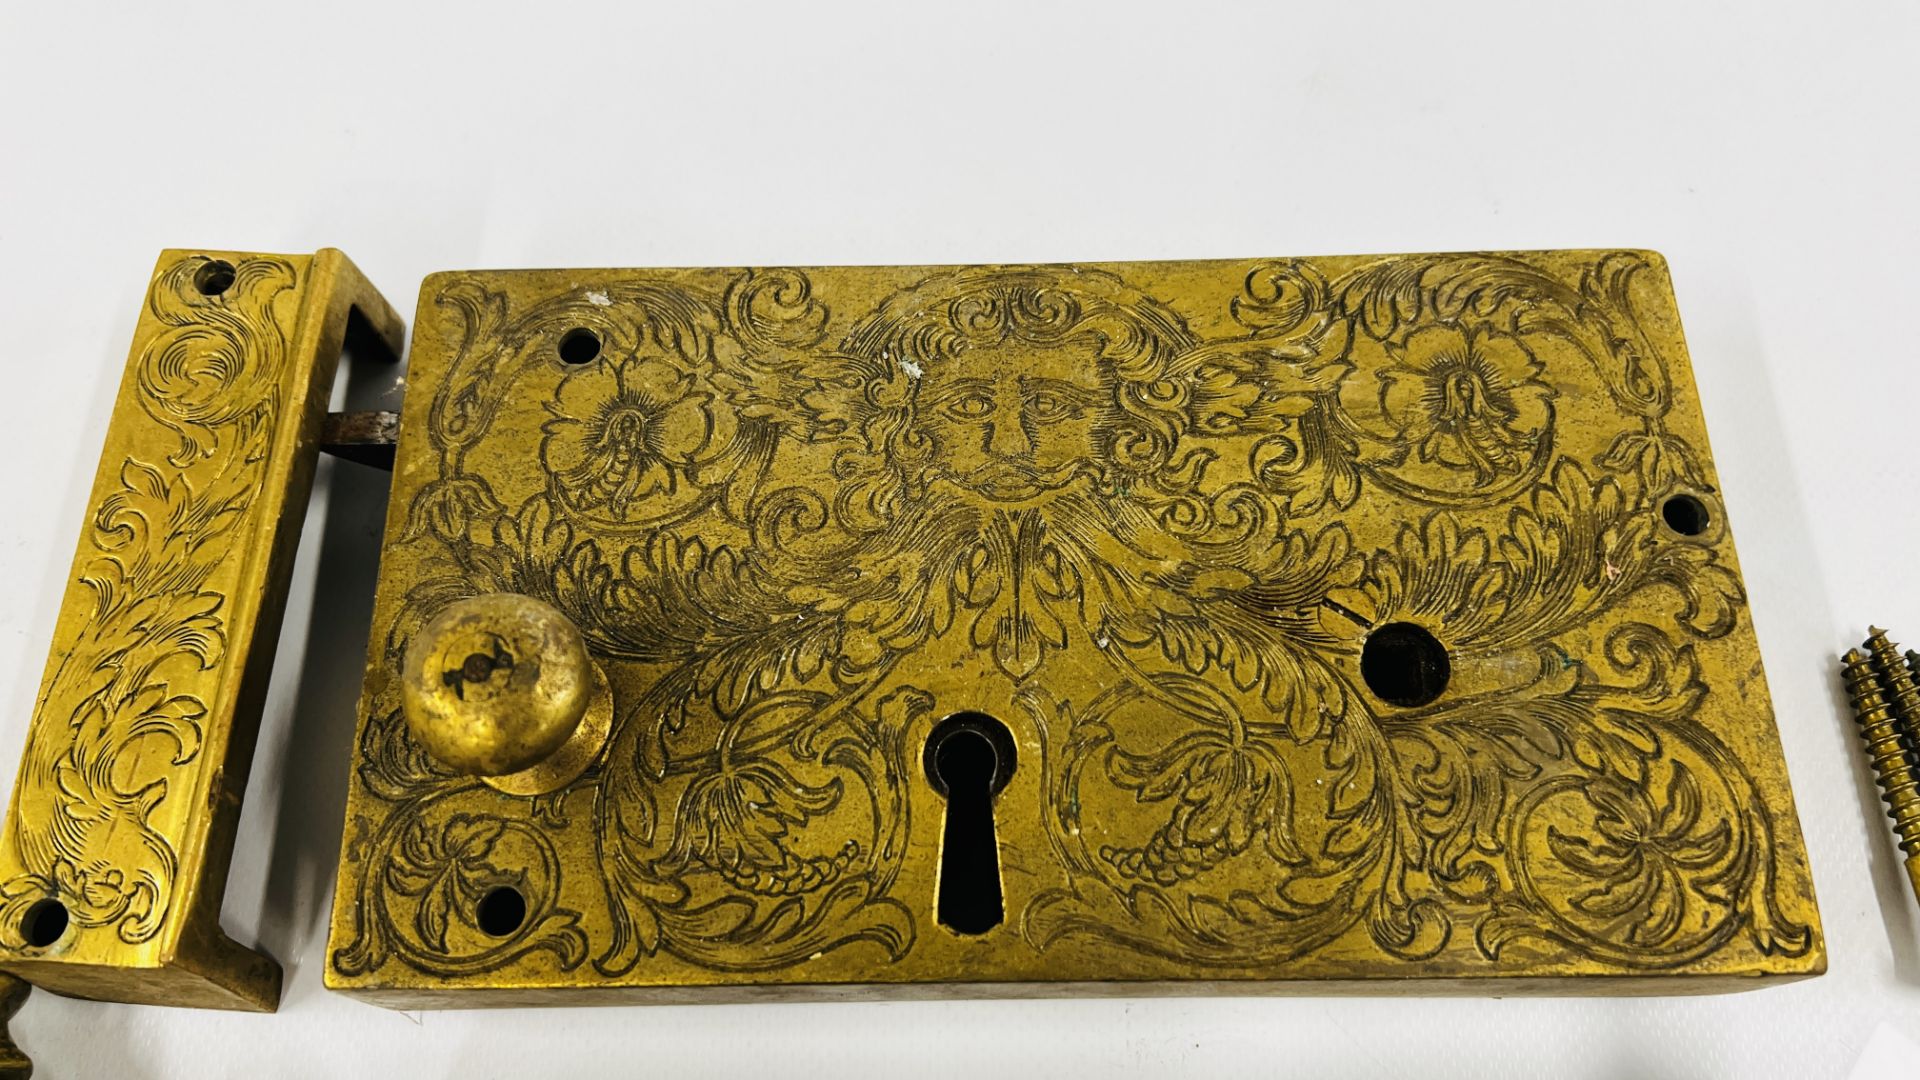 A PAIR OF ELABORATE ANTIQUE SOLID BRASS DOOR LOCKS PROBABLY C18th RETAINING THE ORIGINAL KEYS, - Image 3 of 12